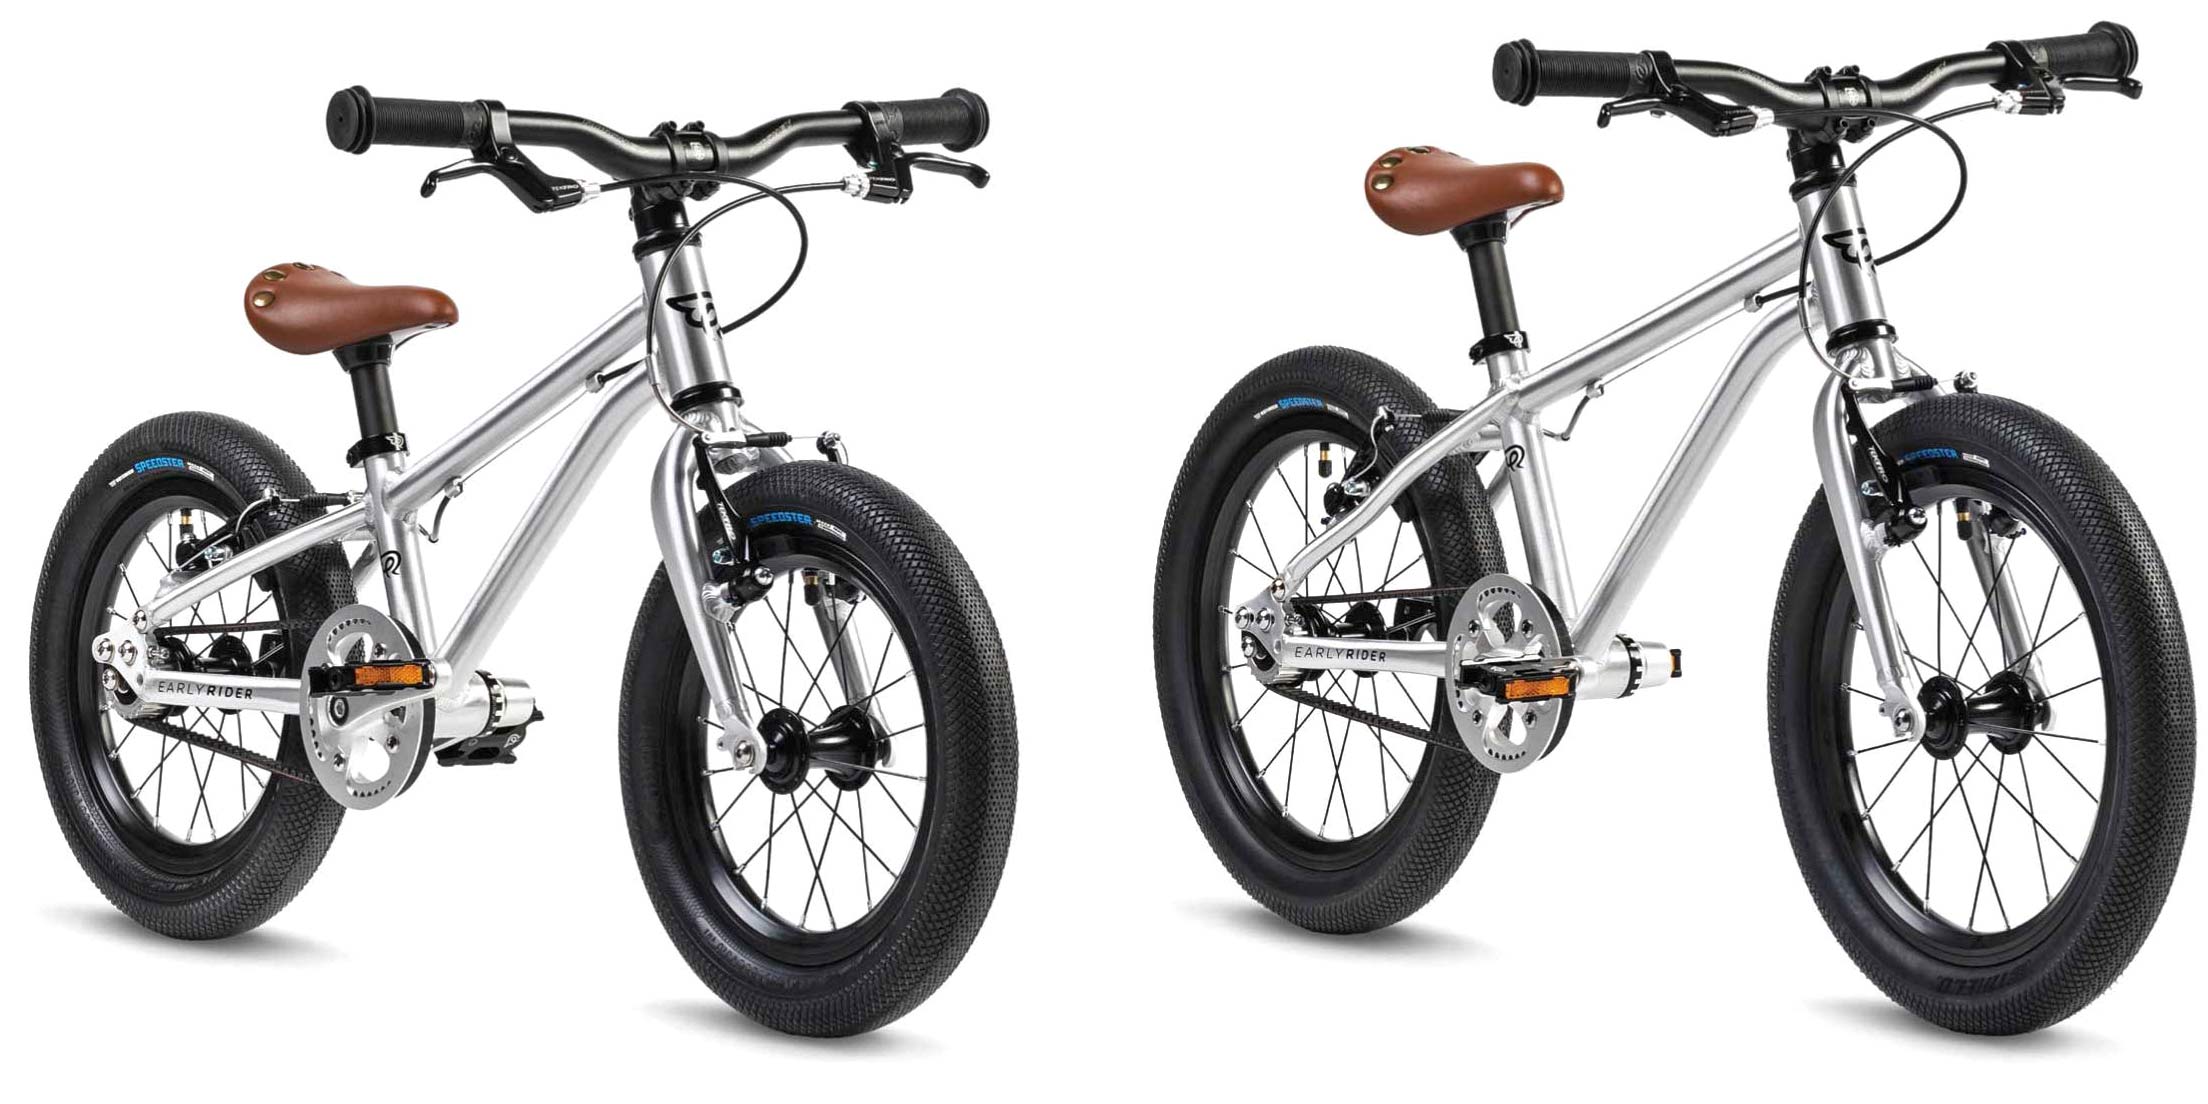 Early Rider + Lil Shredder affordable, lightweight aluminum alloy performance kids mountain bikes